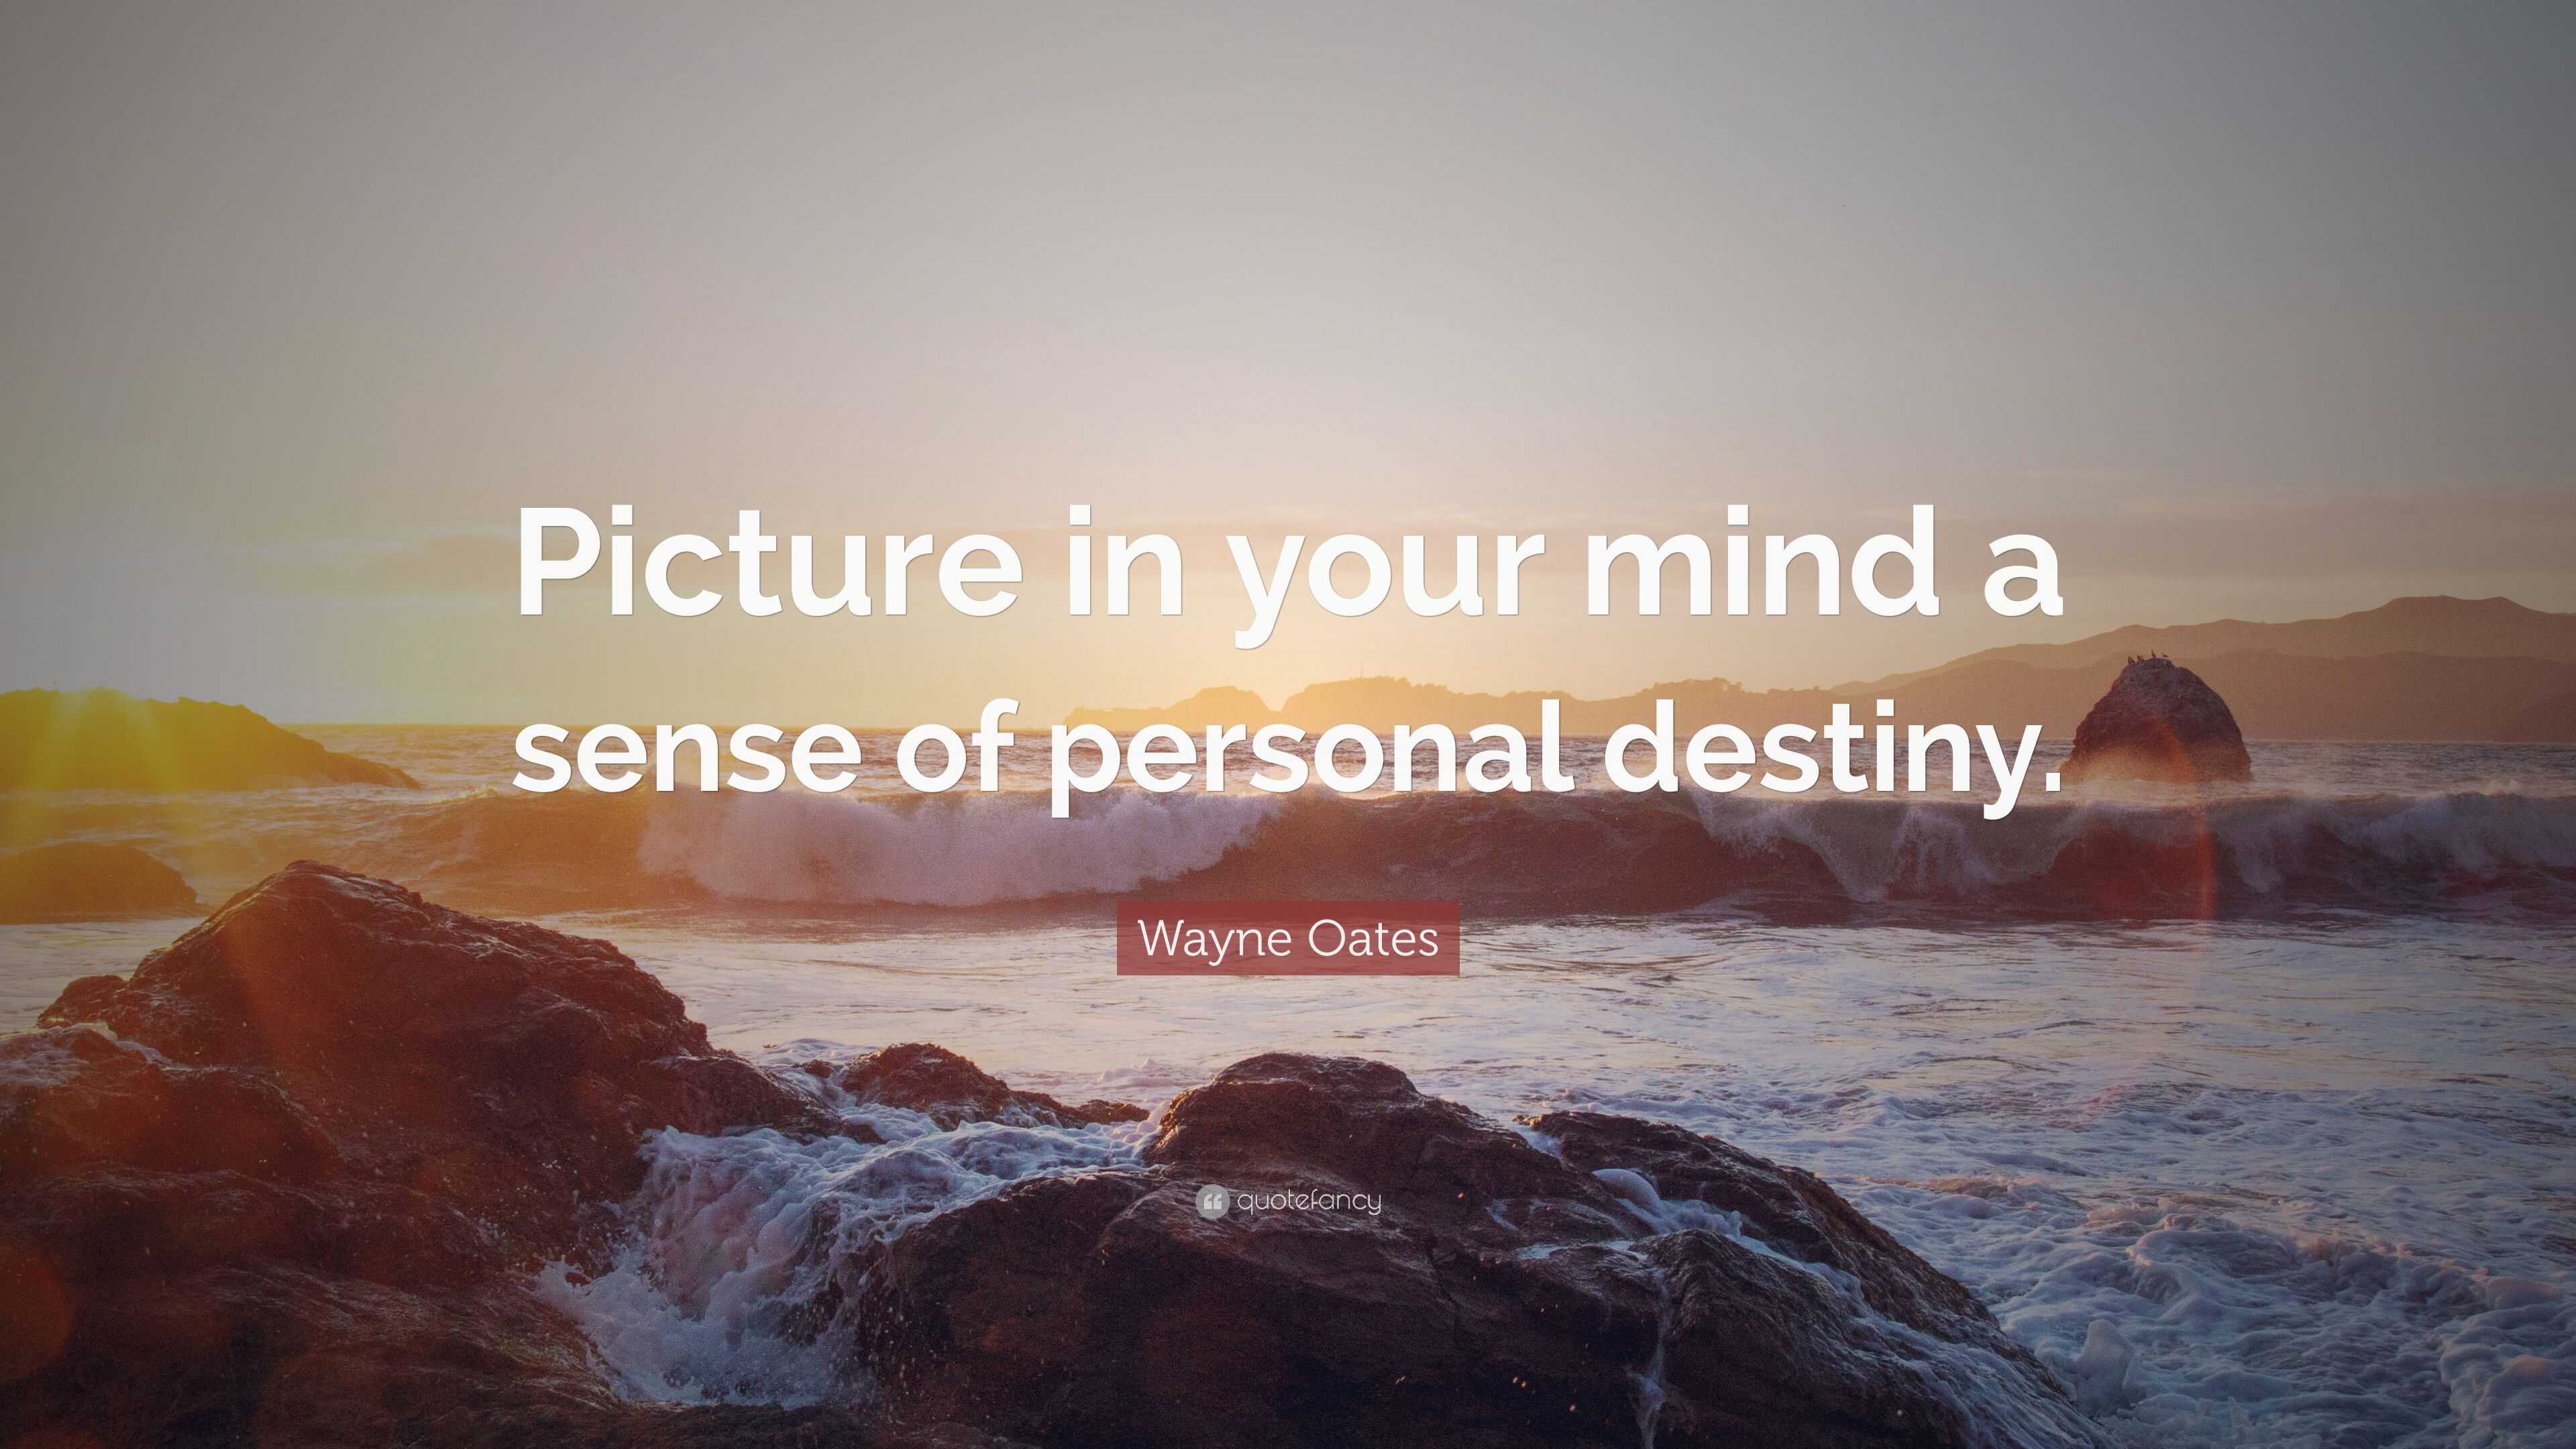 Wayne Oates Quote “picture In Your Mind A Sense Of Personal Destiny”